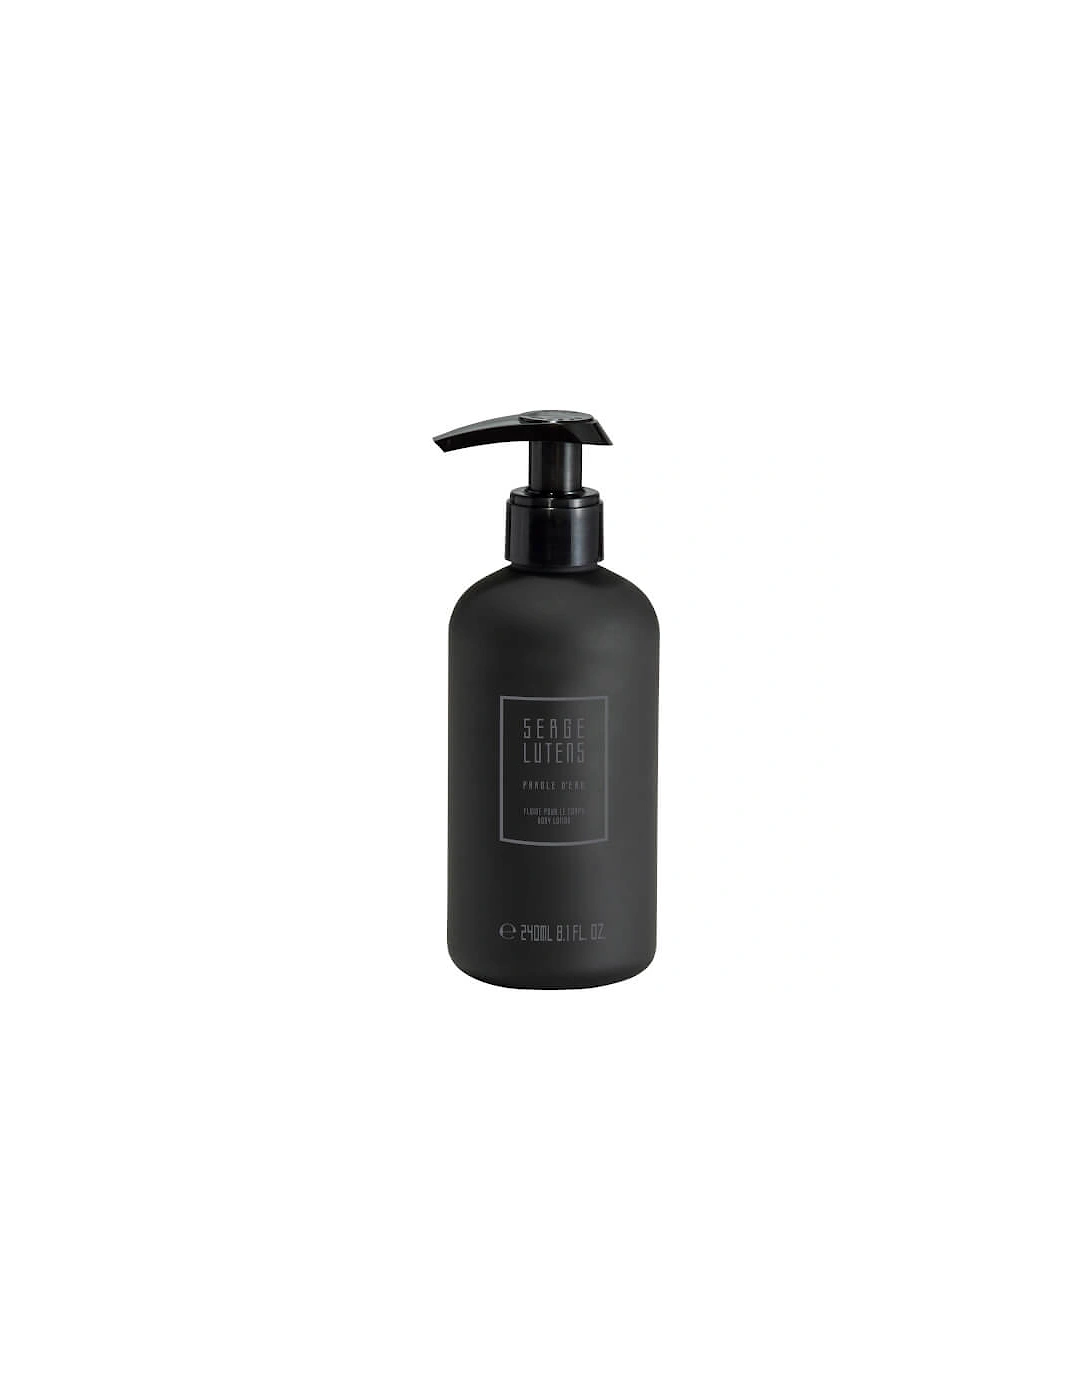 Matin Lutens Parole Deau Hand and Body Lotion 240ml, 2 of 1